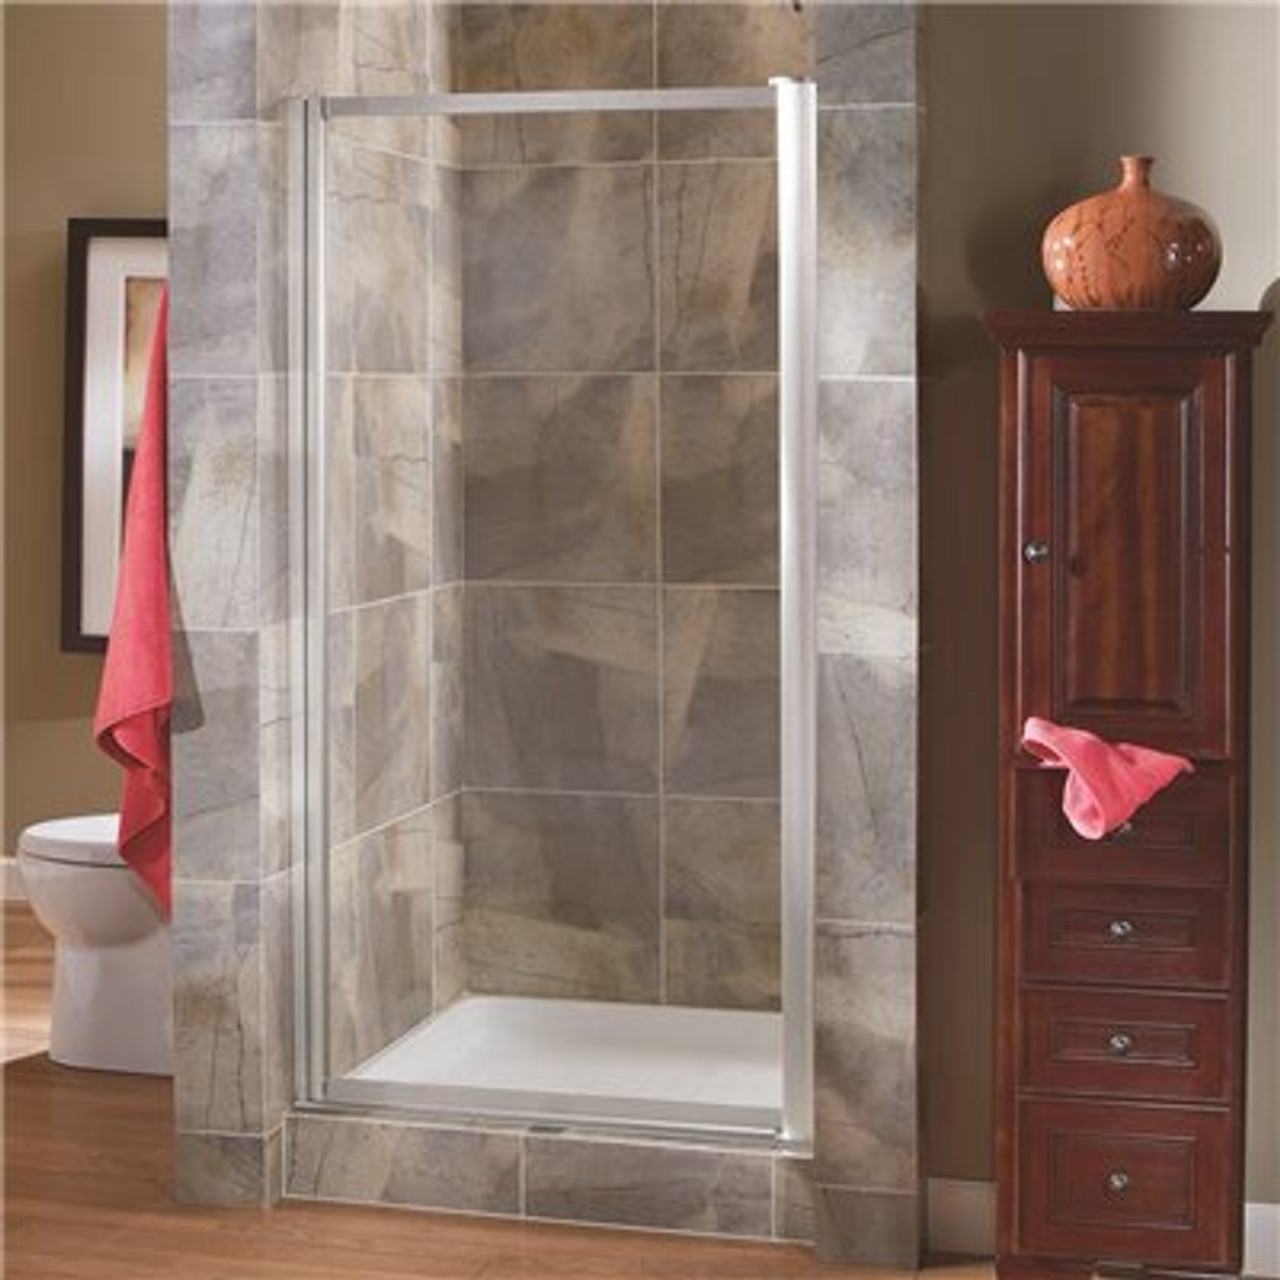 Foremost Groups Tides 23 In. To 25 In. X 65 In. Framed Pivot Shower Door In Brushed Nickel With Clear Glass